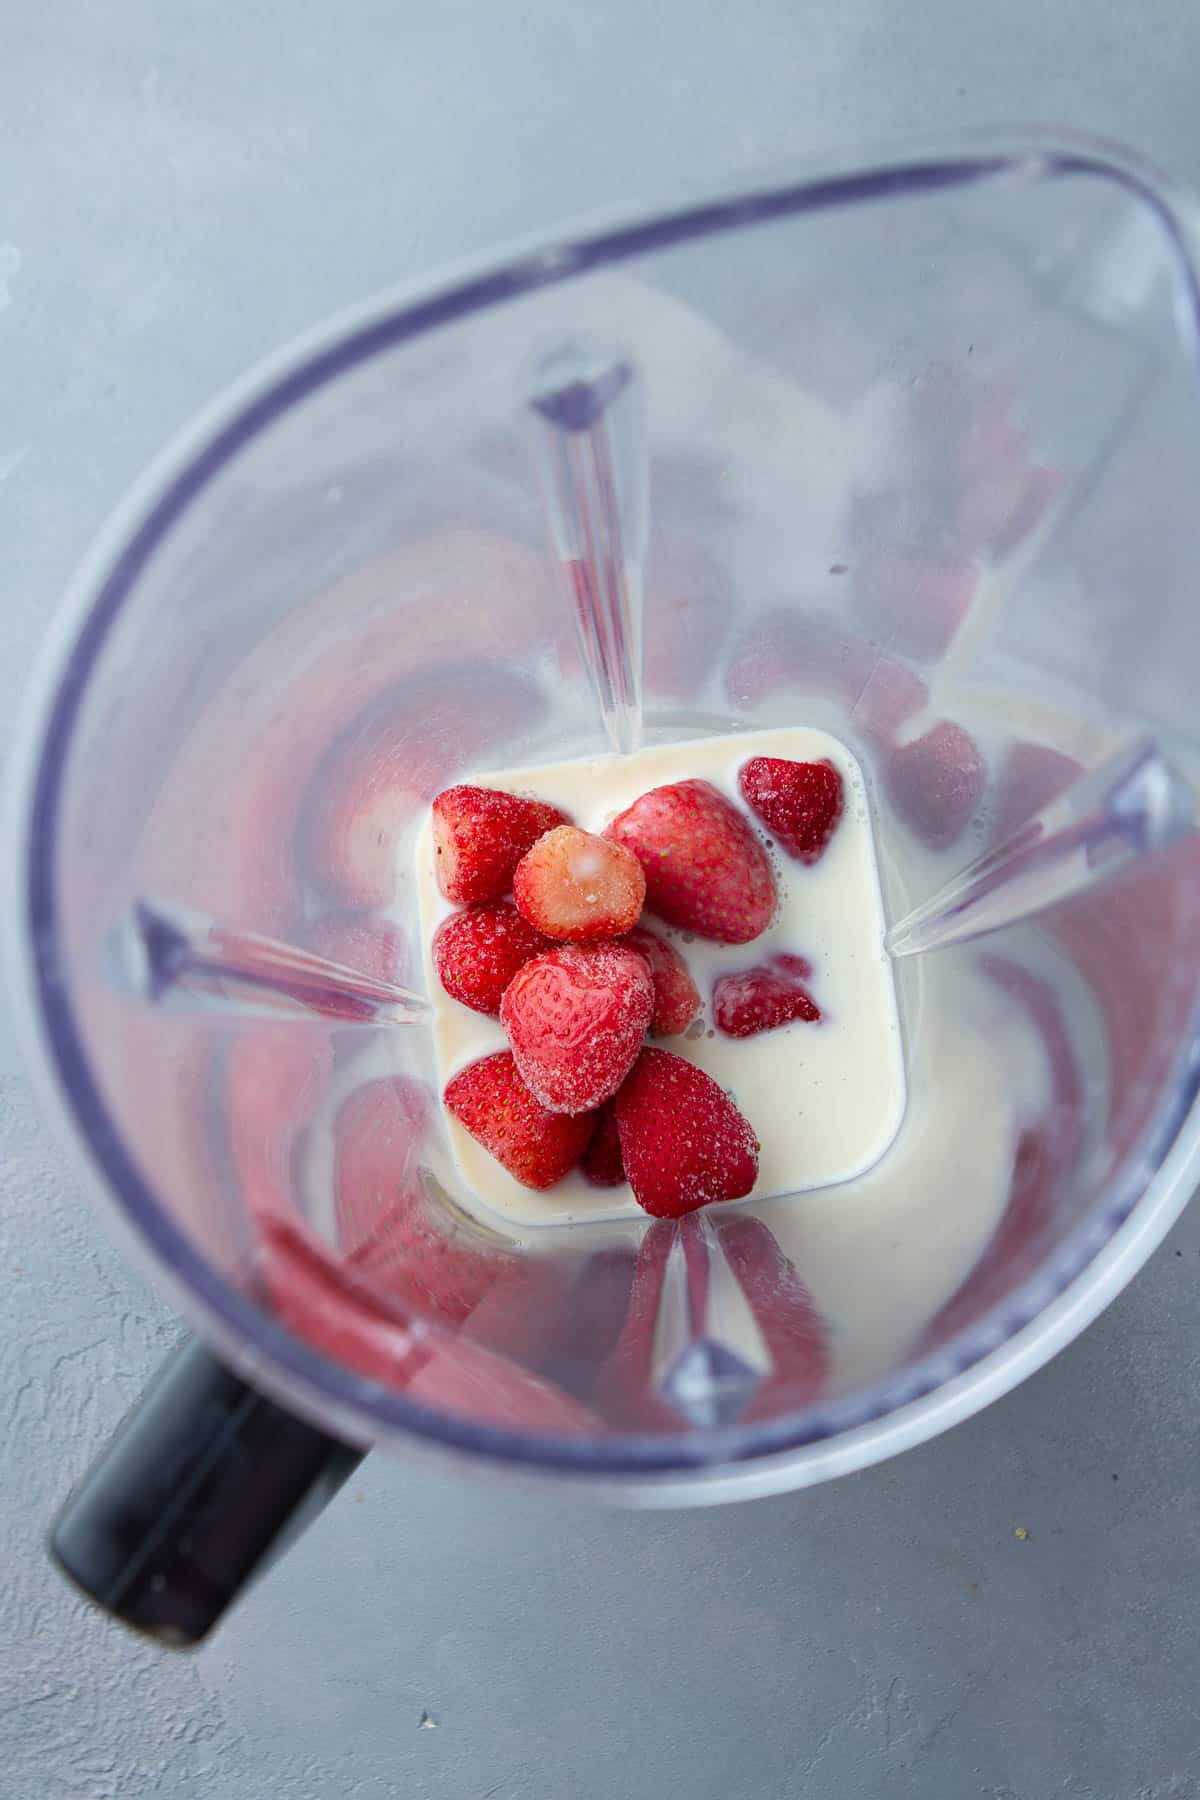 Strawberries and soy milk in a blender.